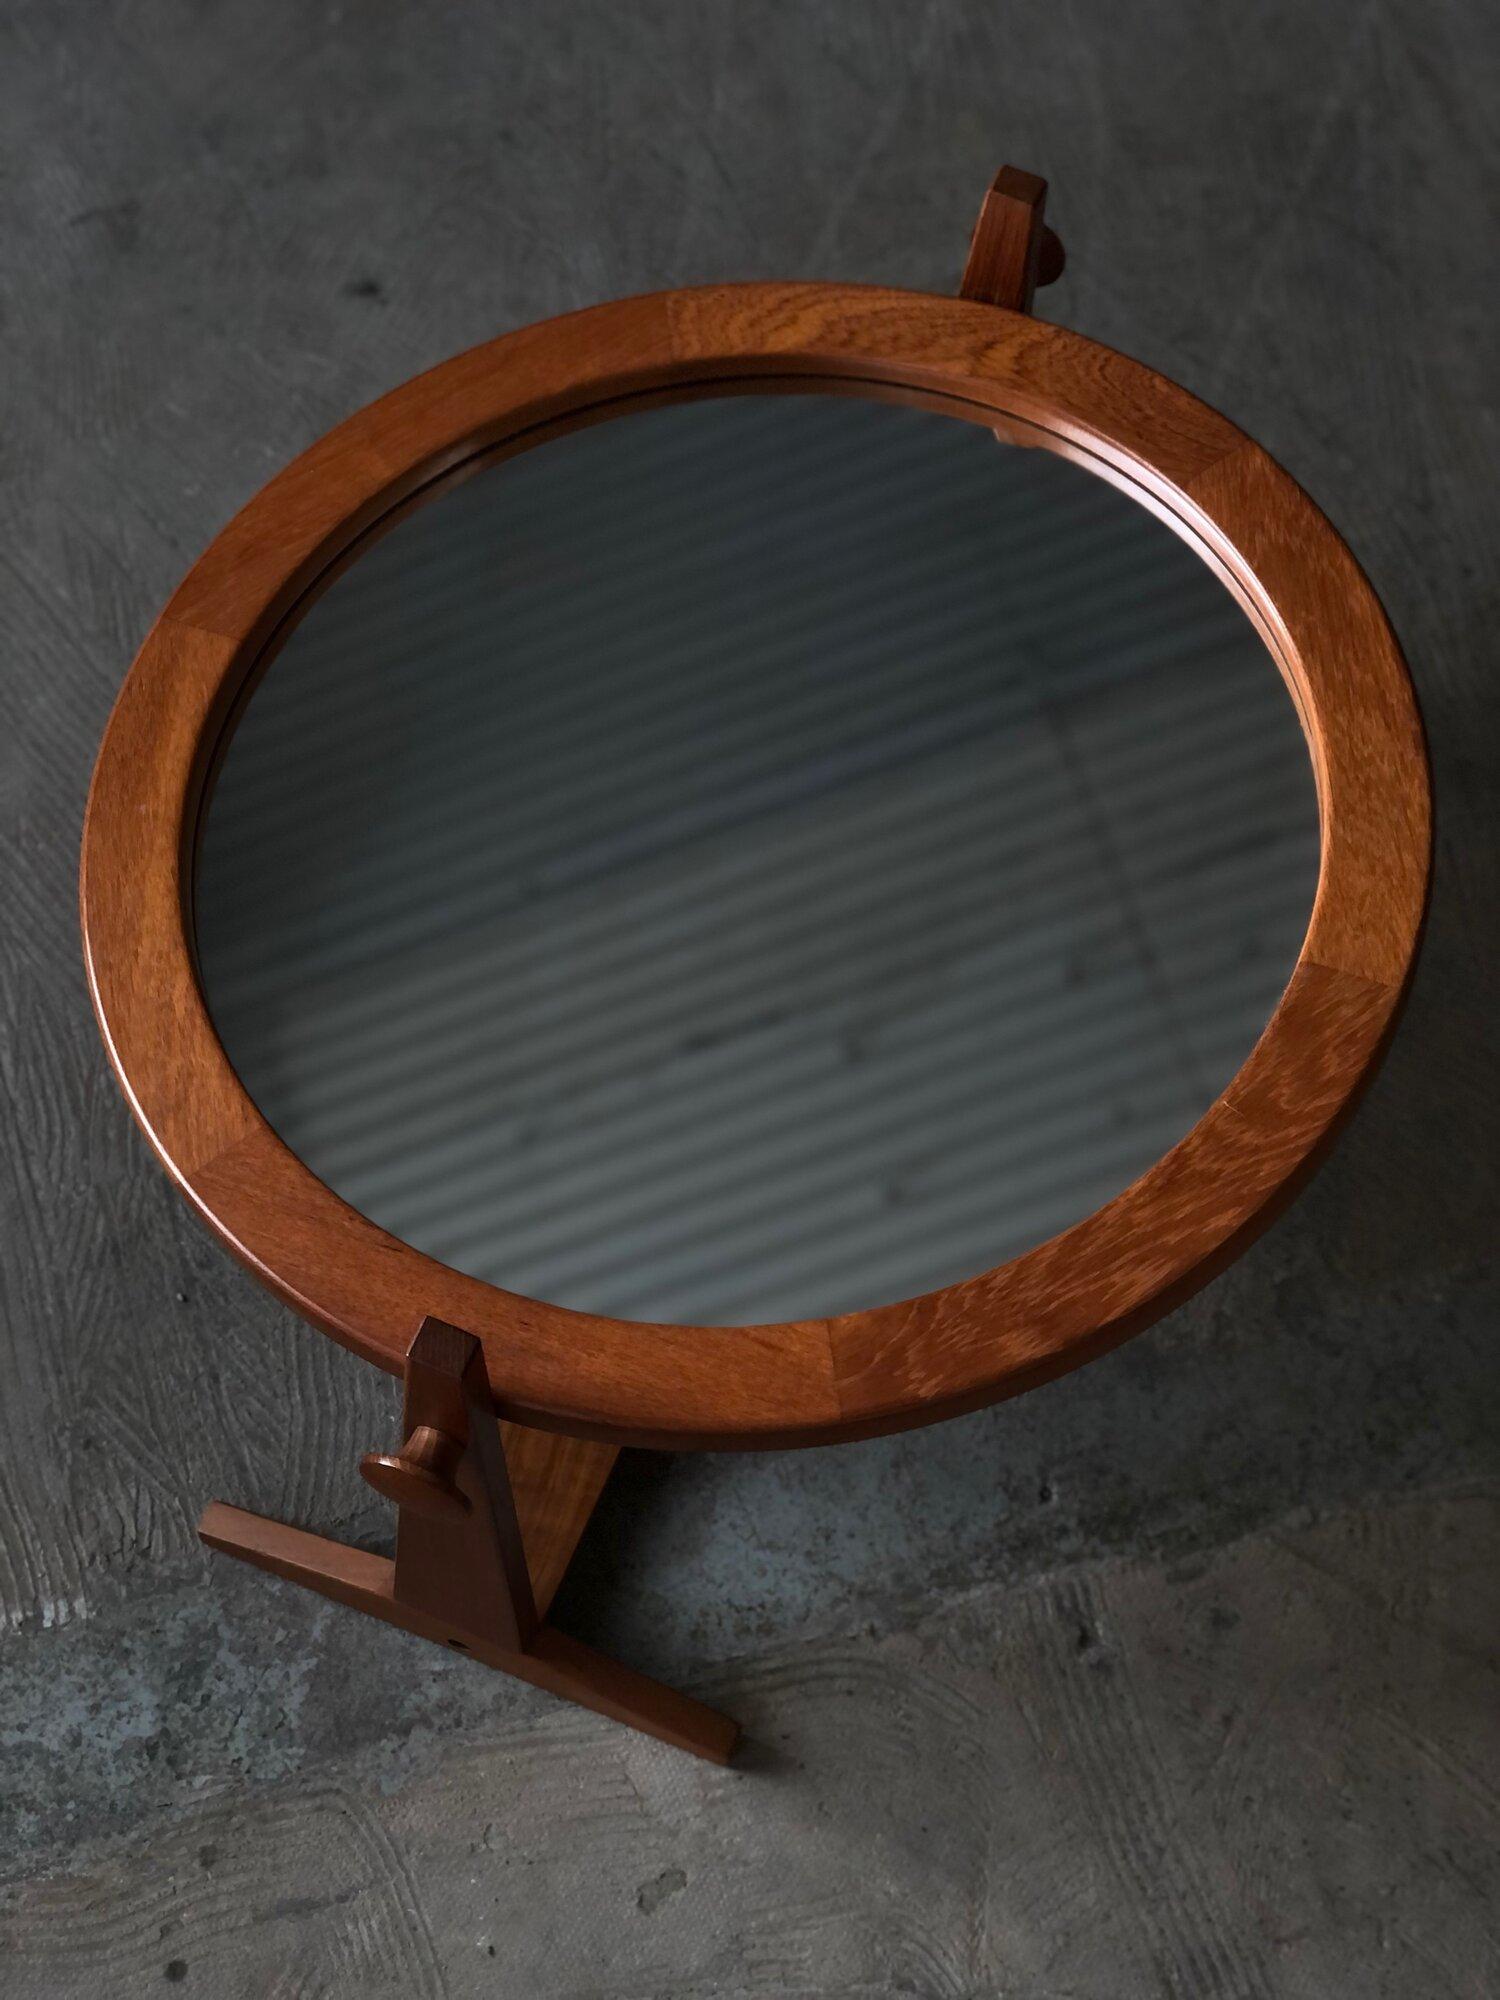 Solid teak tilting table-top mirror by Pedersen and Hansen, Denmark. This piece features nice finger joinery detailing on the frame and turned knobs that allow for adjustment and Measures 27” W x 11.25” D x 25” H. Excellent condition.